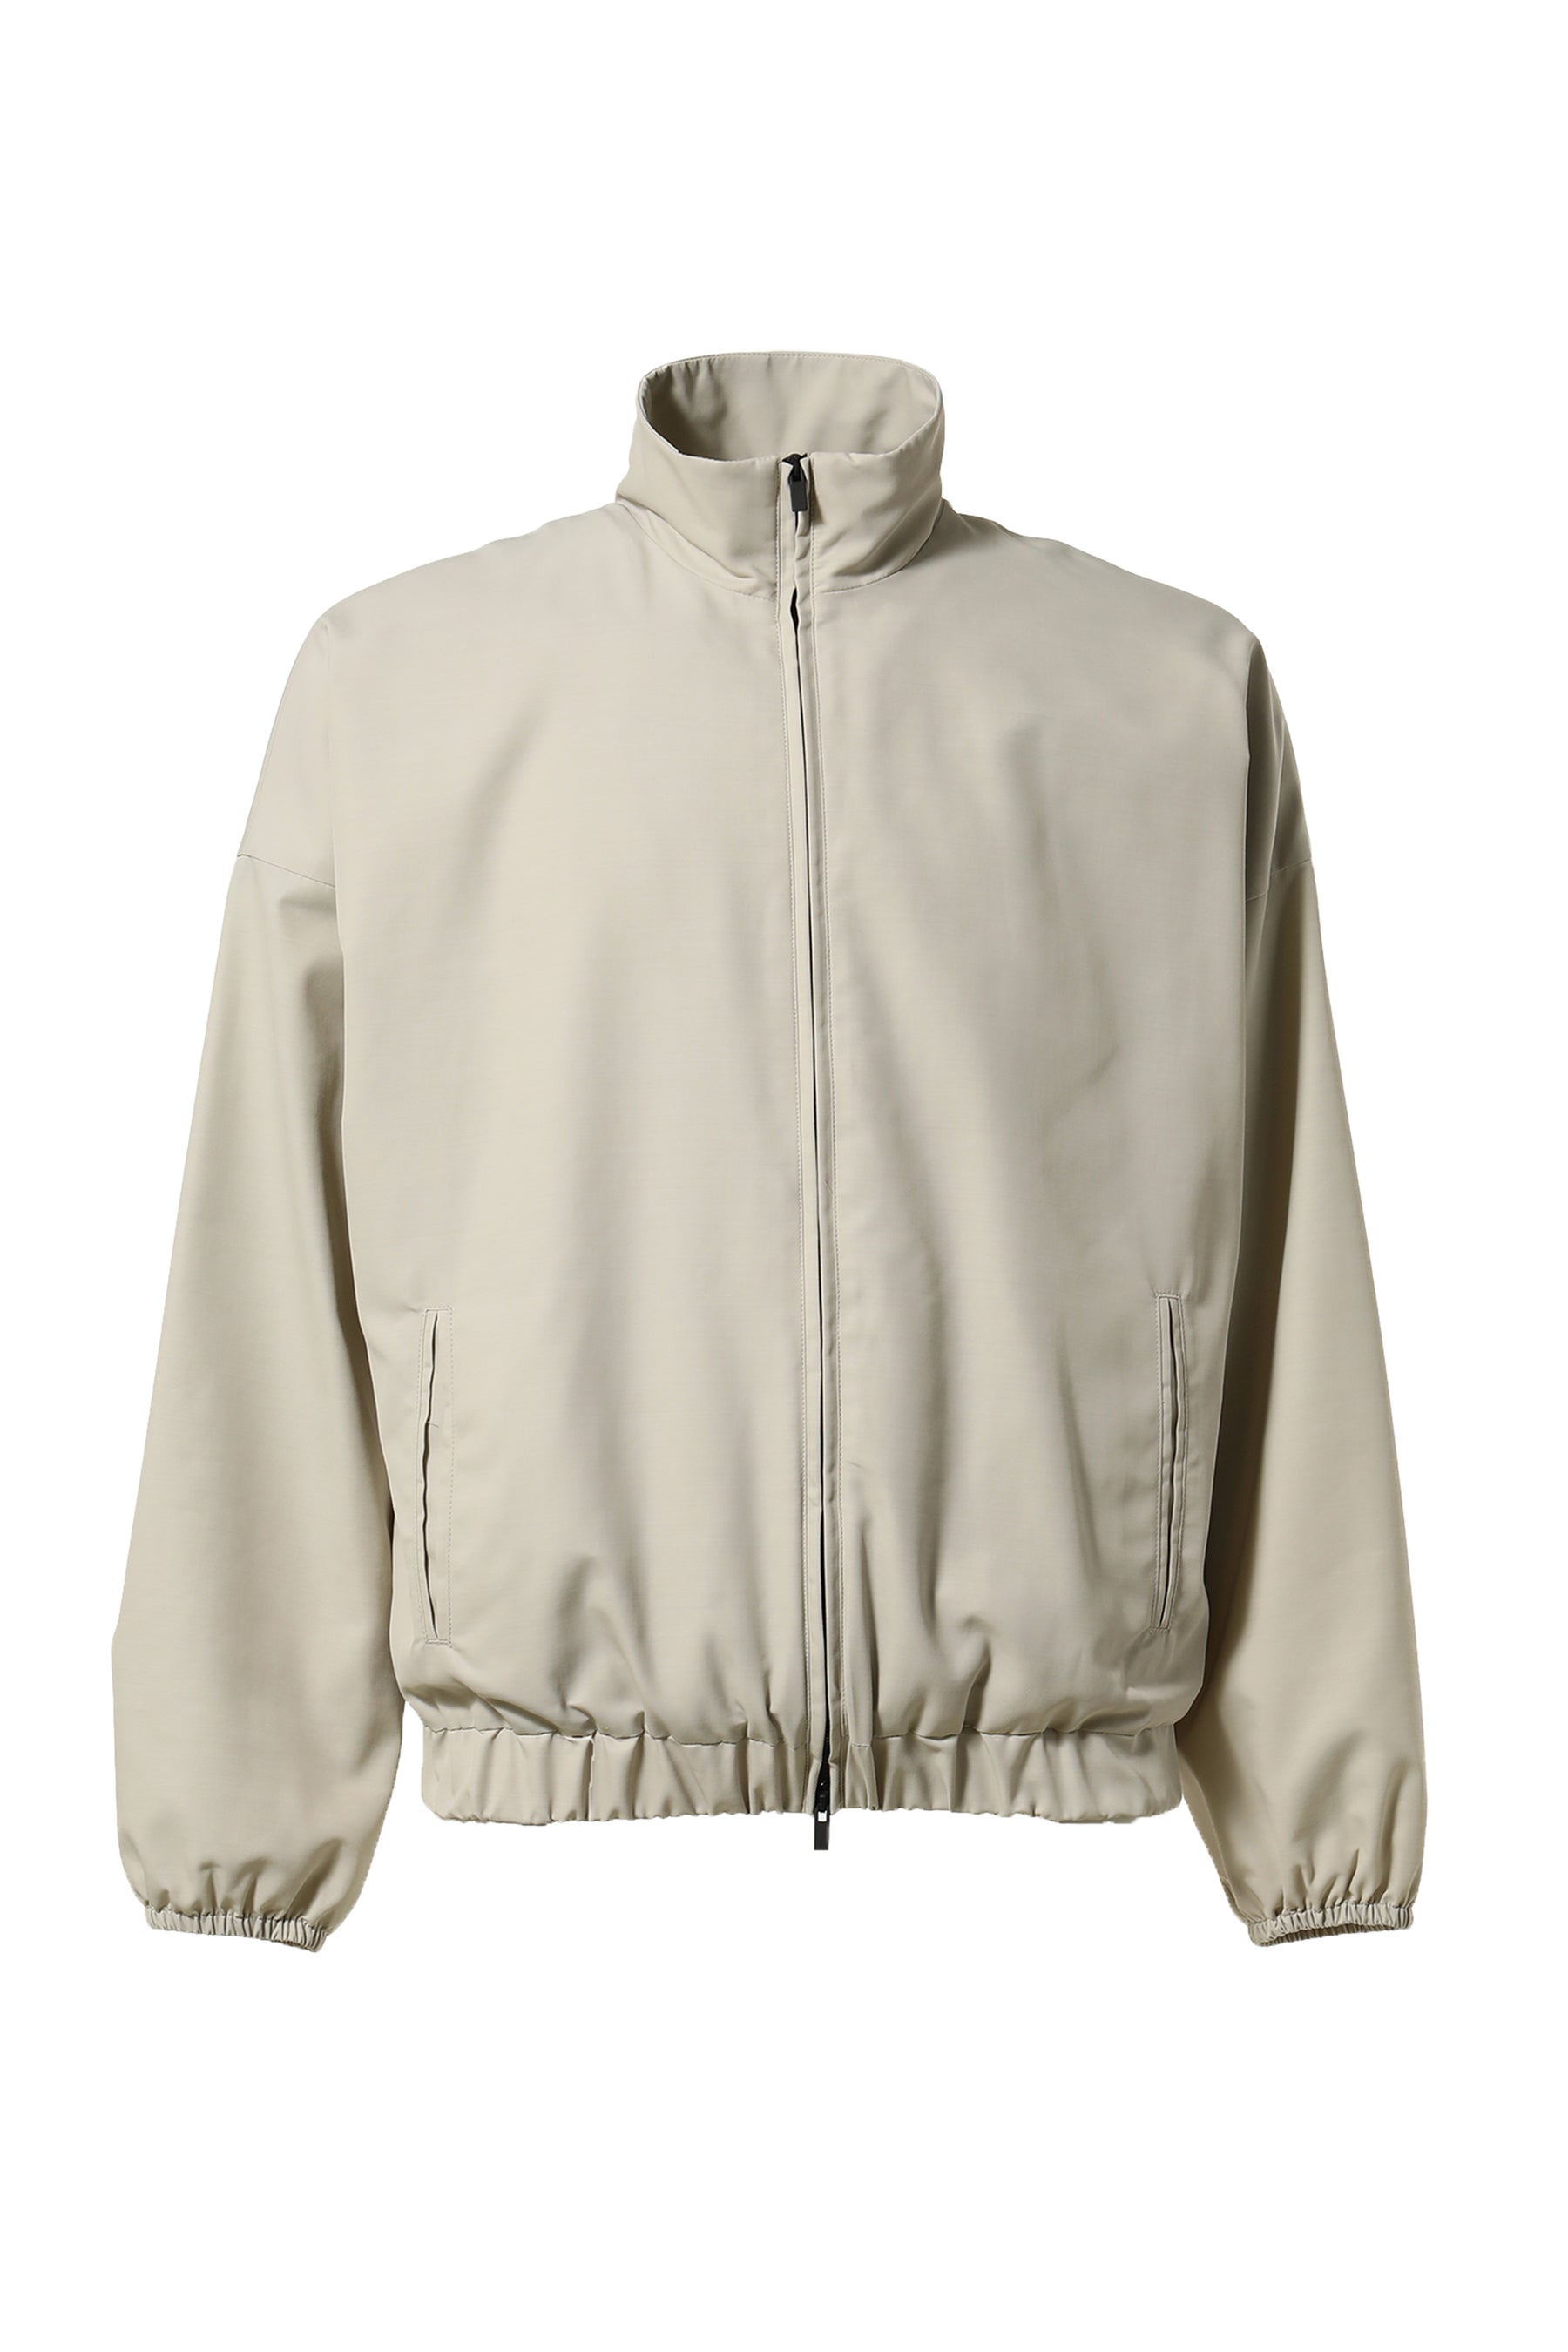 FEAR OF GOD THE ETERNAL COLLECTION ETERNAL WOOL NYLON TRACK JACKET / CEMENT